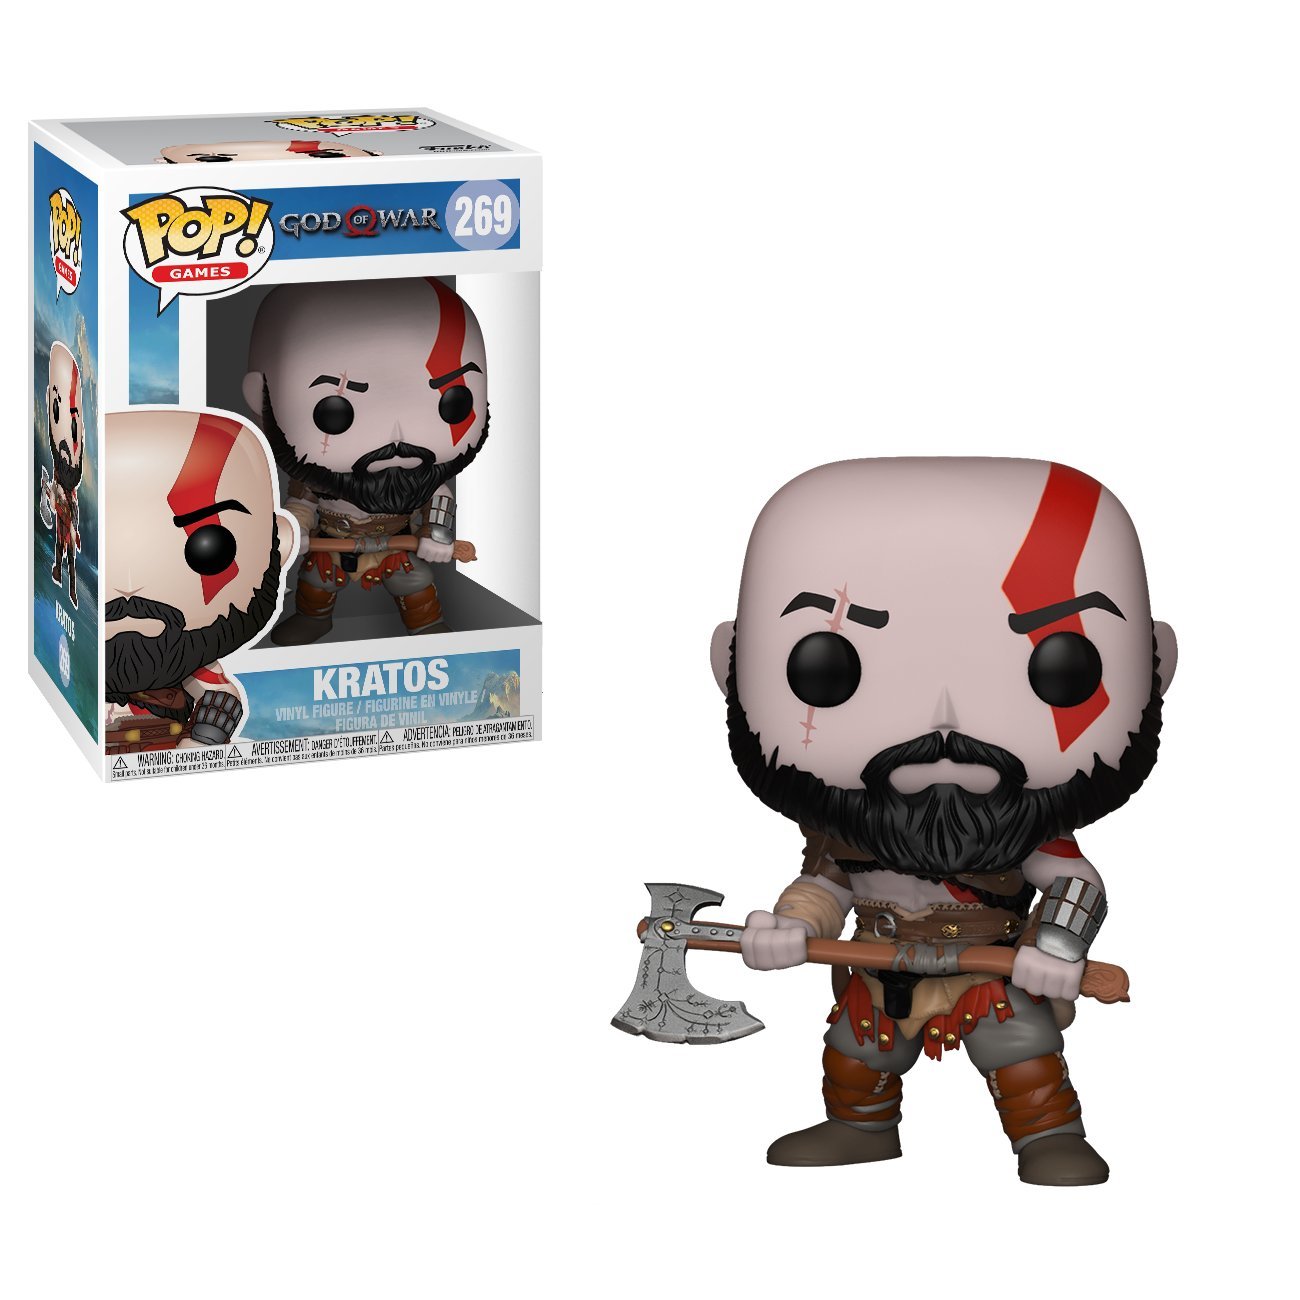 Funko POP! Games: God of War - Kratos with Axe Collectible Figure